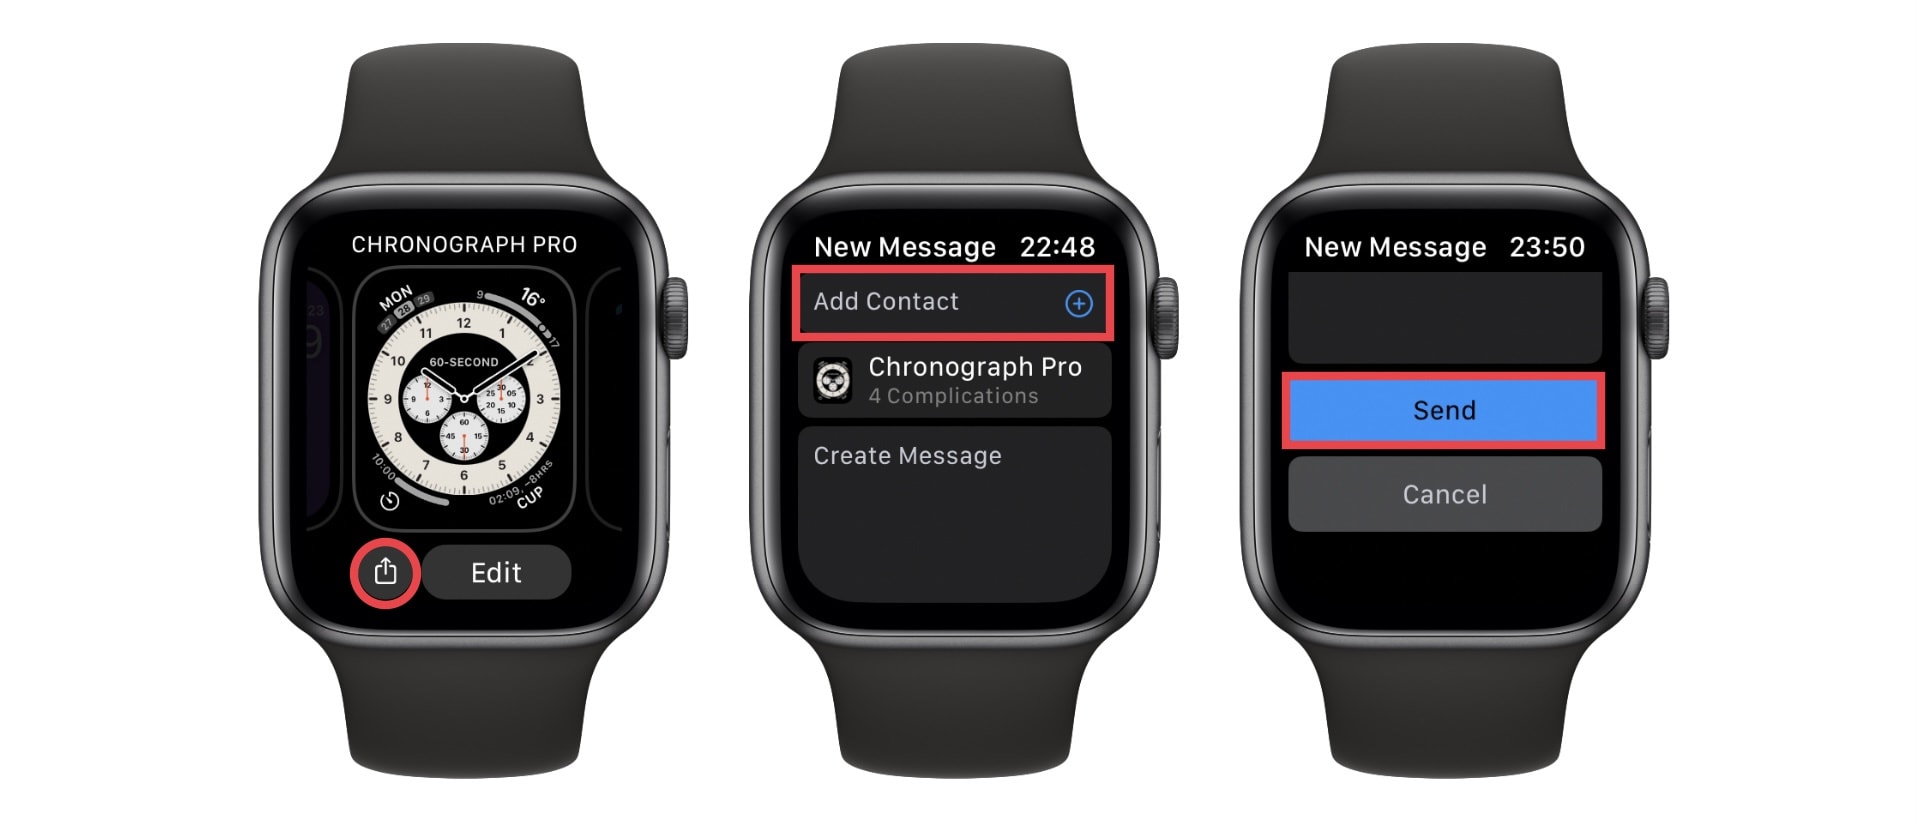 How to share and download Apple Watch faces in watchOS 7